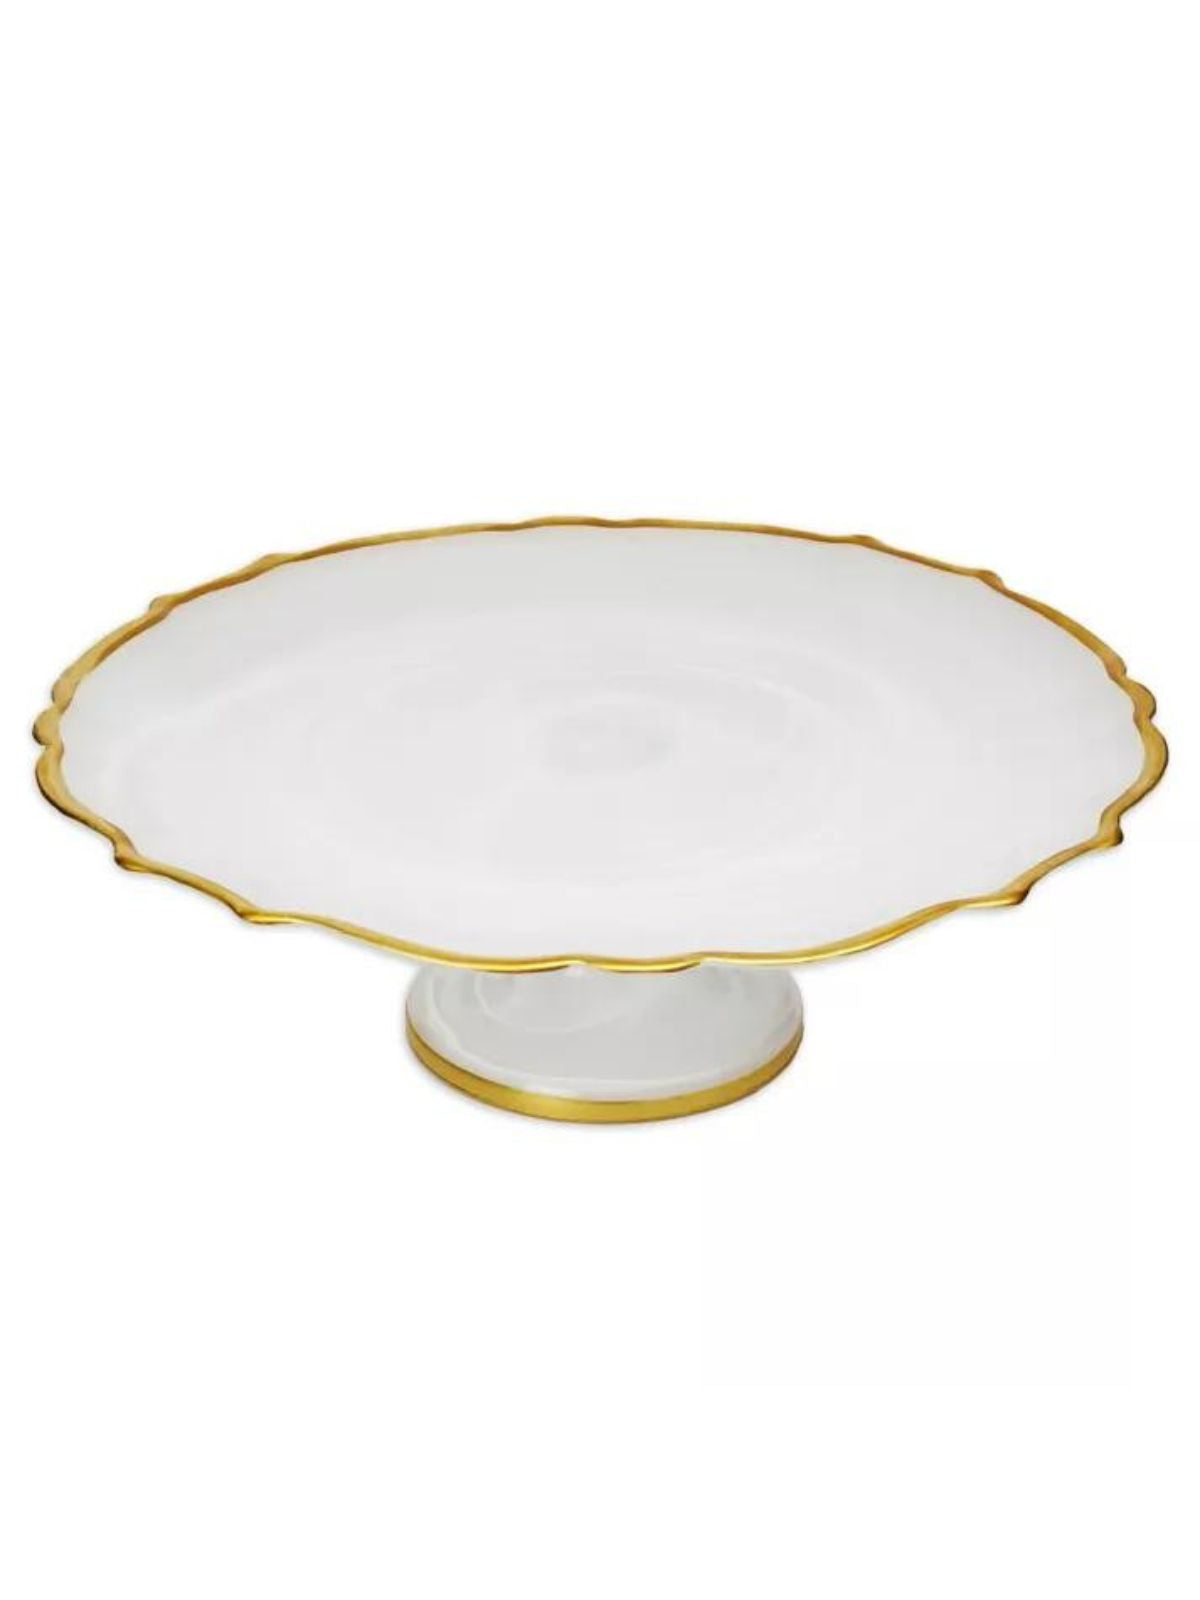 13D White Alabaster Footed Cake Stand With Gold Scalloped Edges sold by KYA Home Decor.